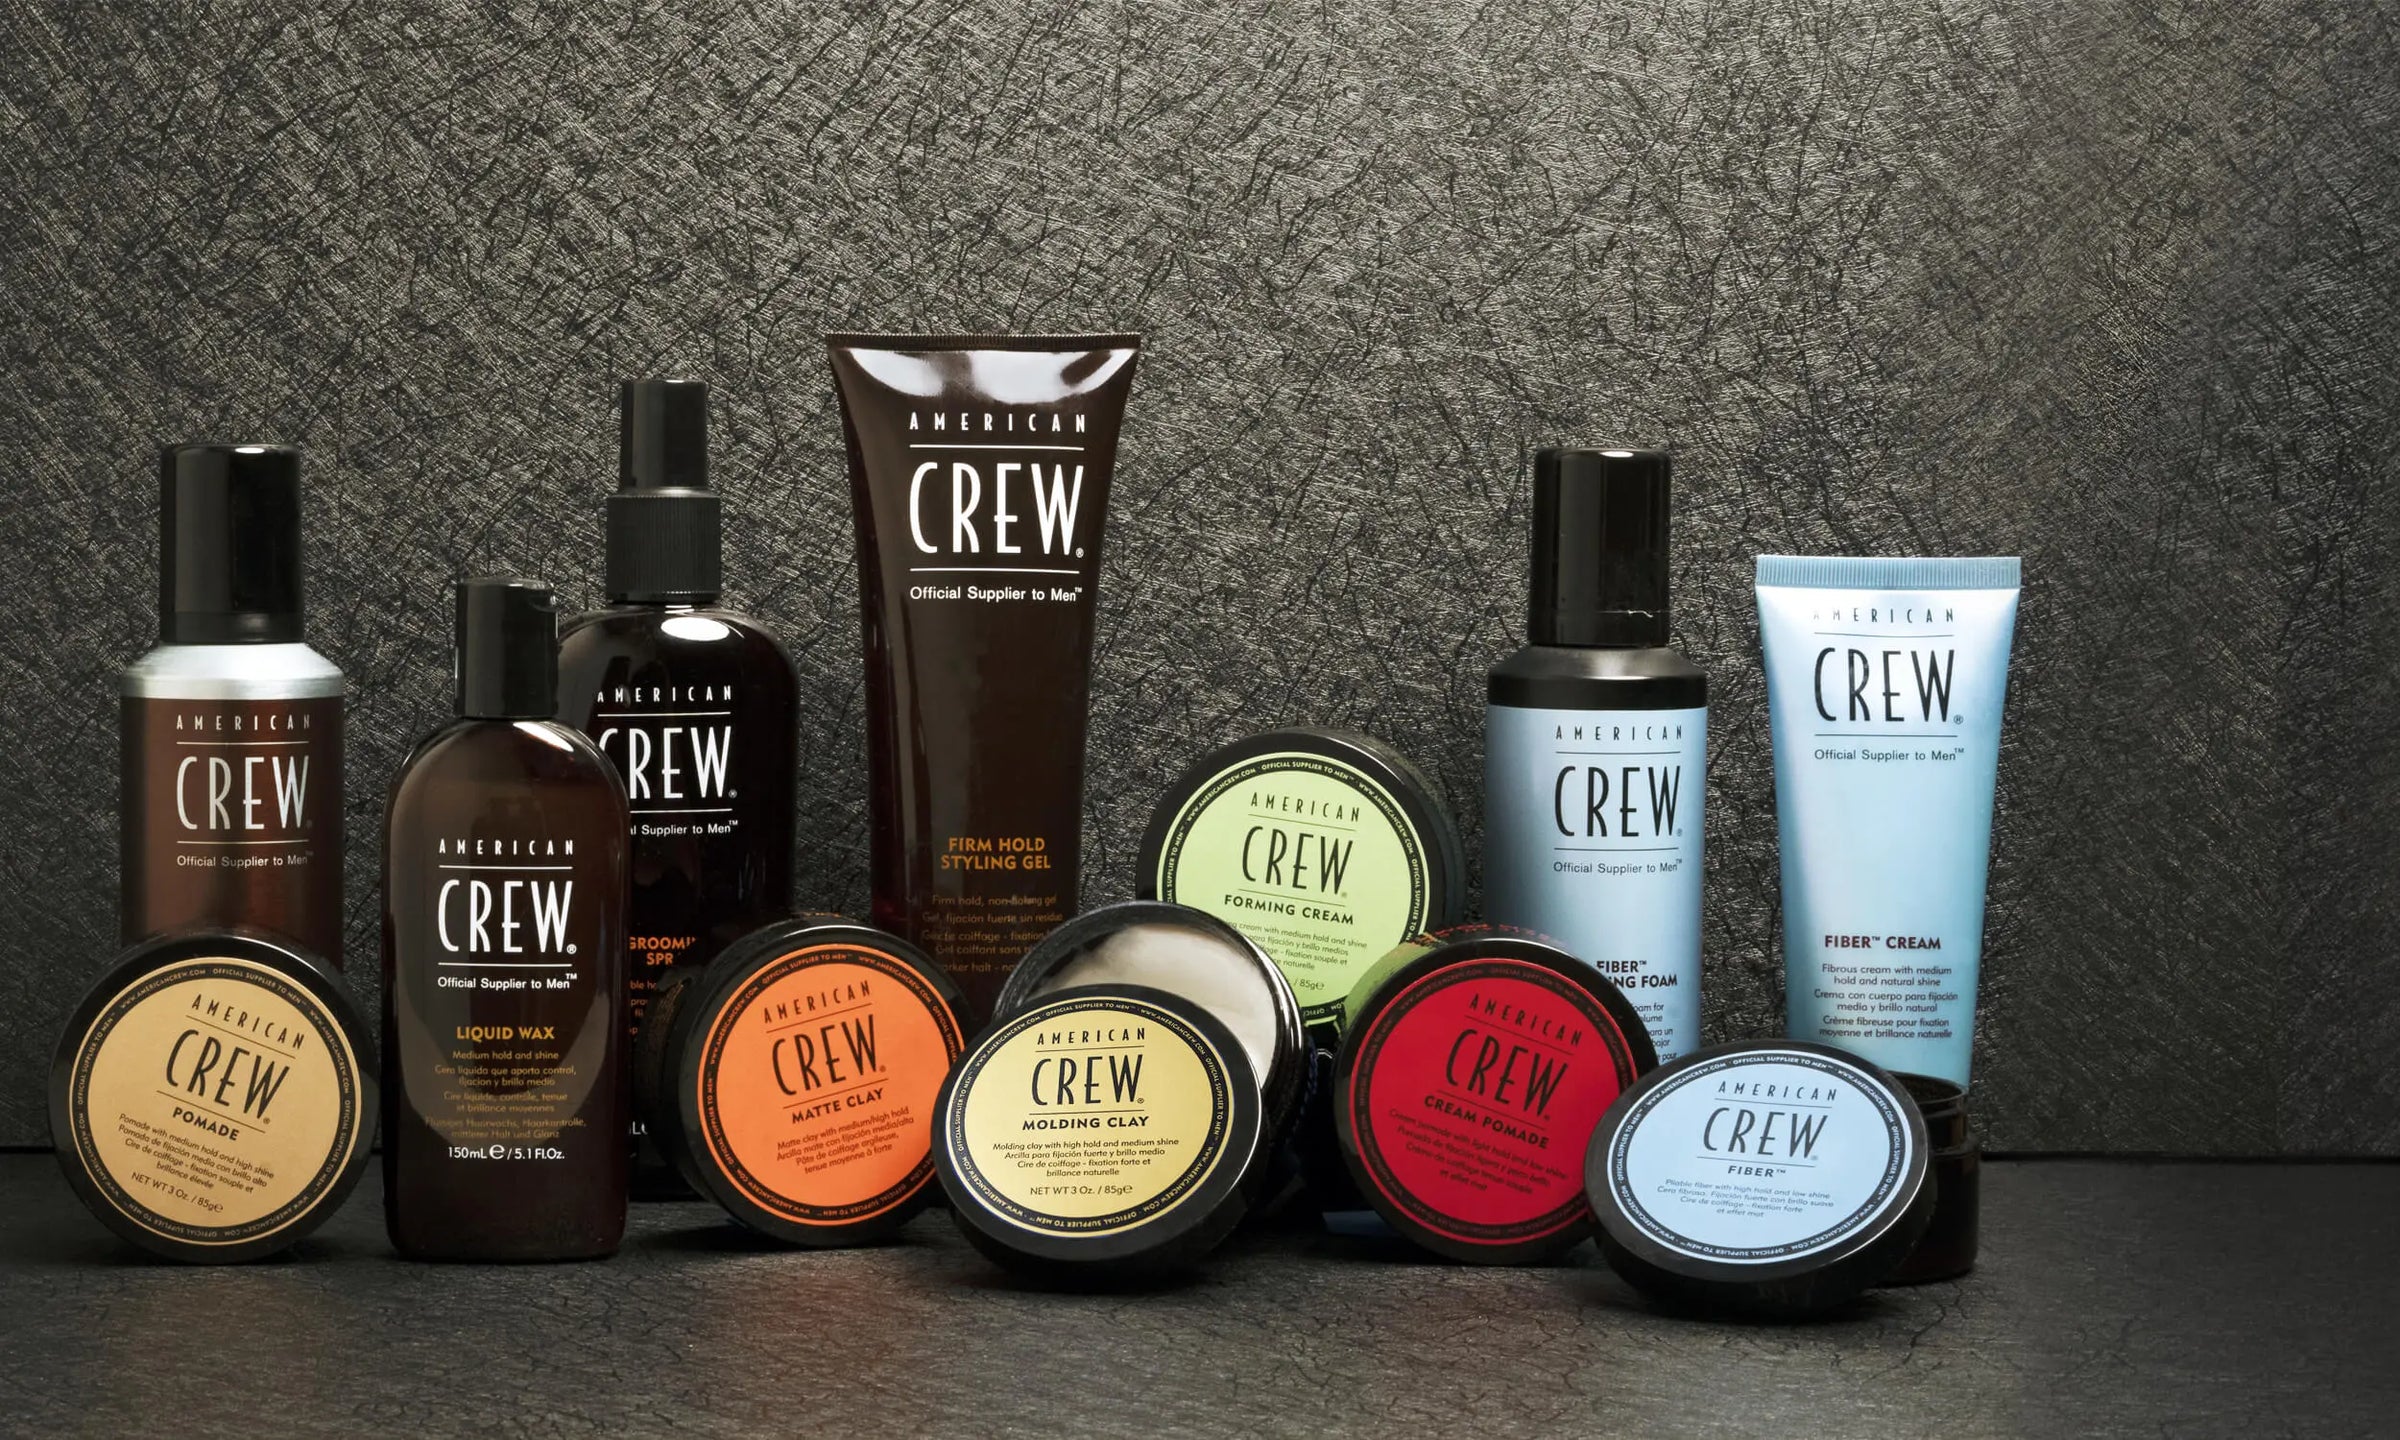 All Hair Care and Hair Styling Products - American Crew